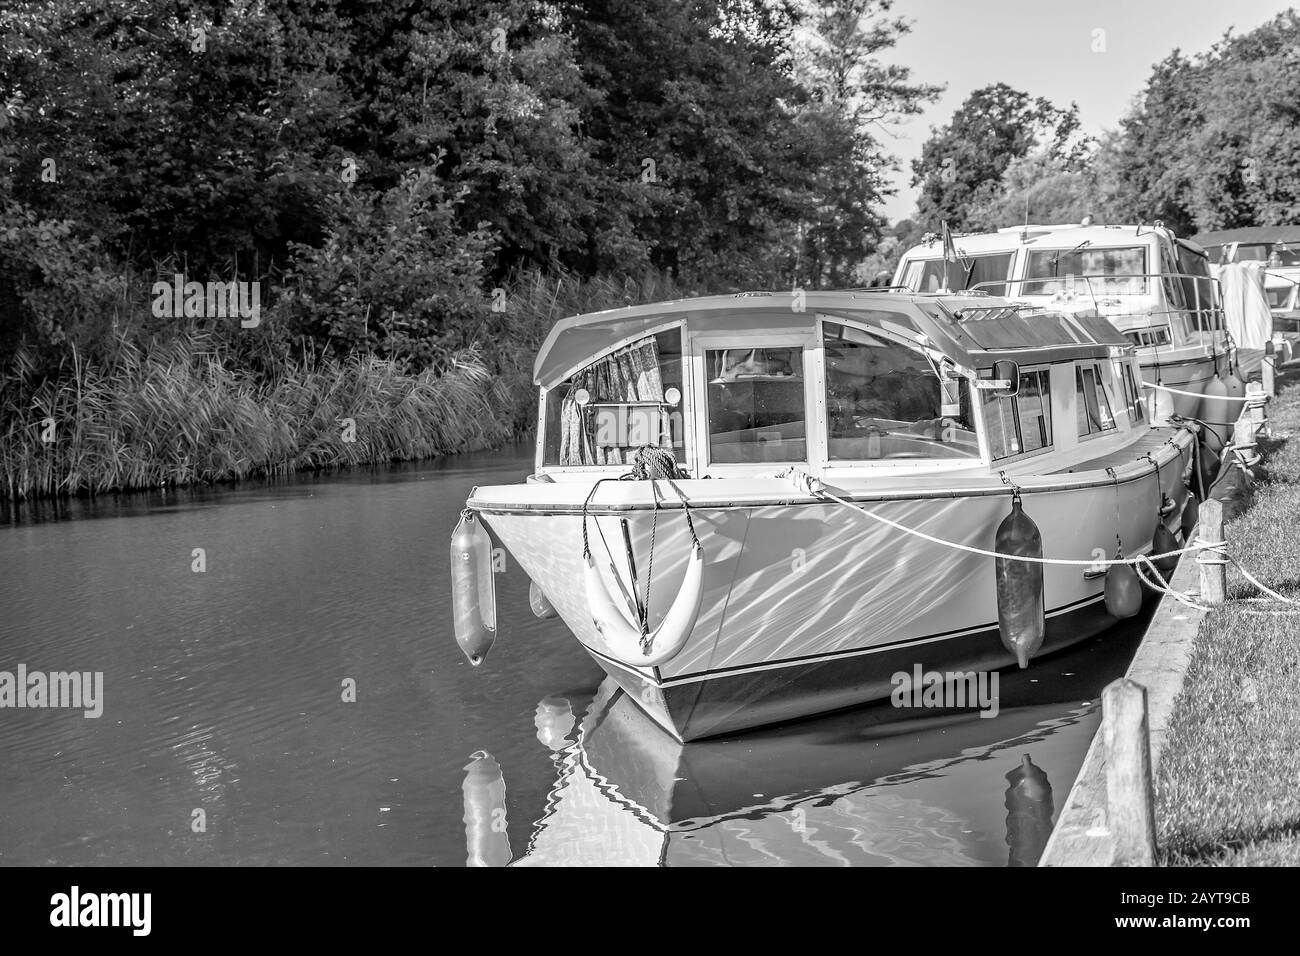 2 Front on view of holiday cruiser boat moored up on a quay heading in the countryside Stock Photo